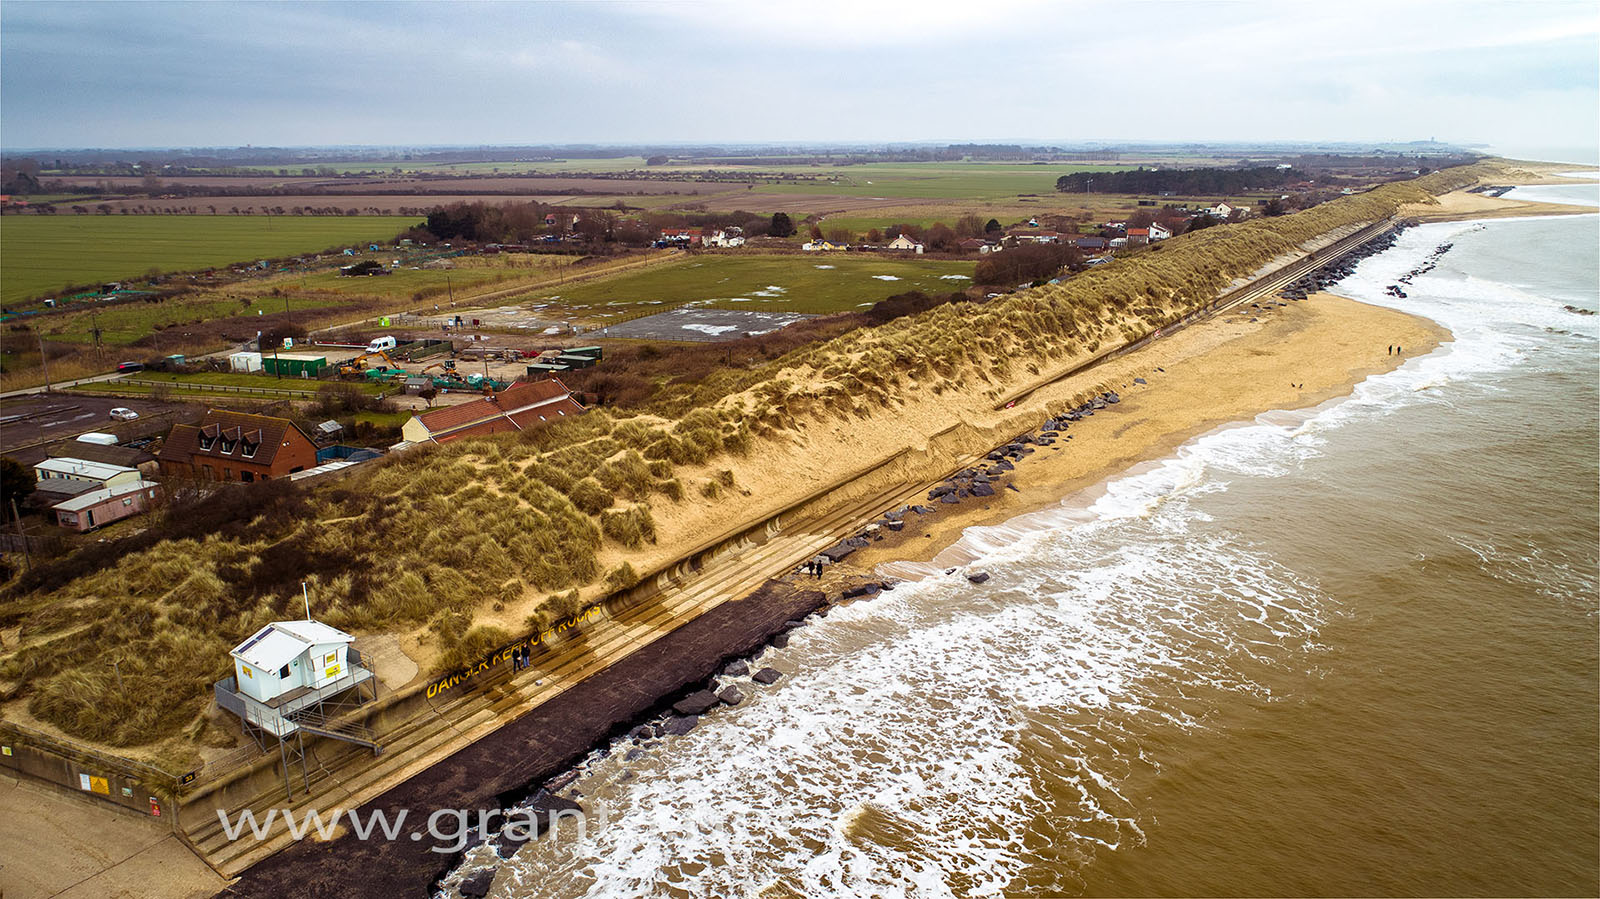 Drone photo of Sea Palling beach, in Norfolk following heavy spring storms in 2018